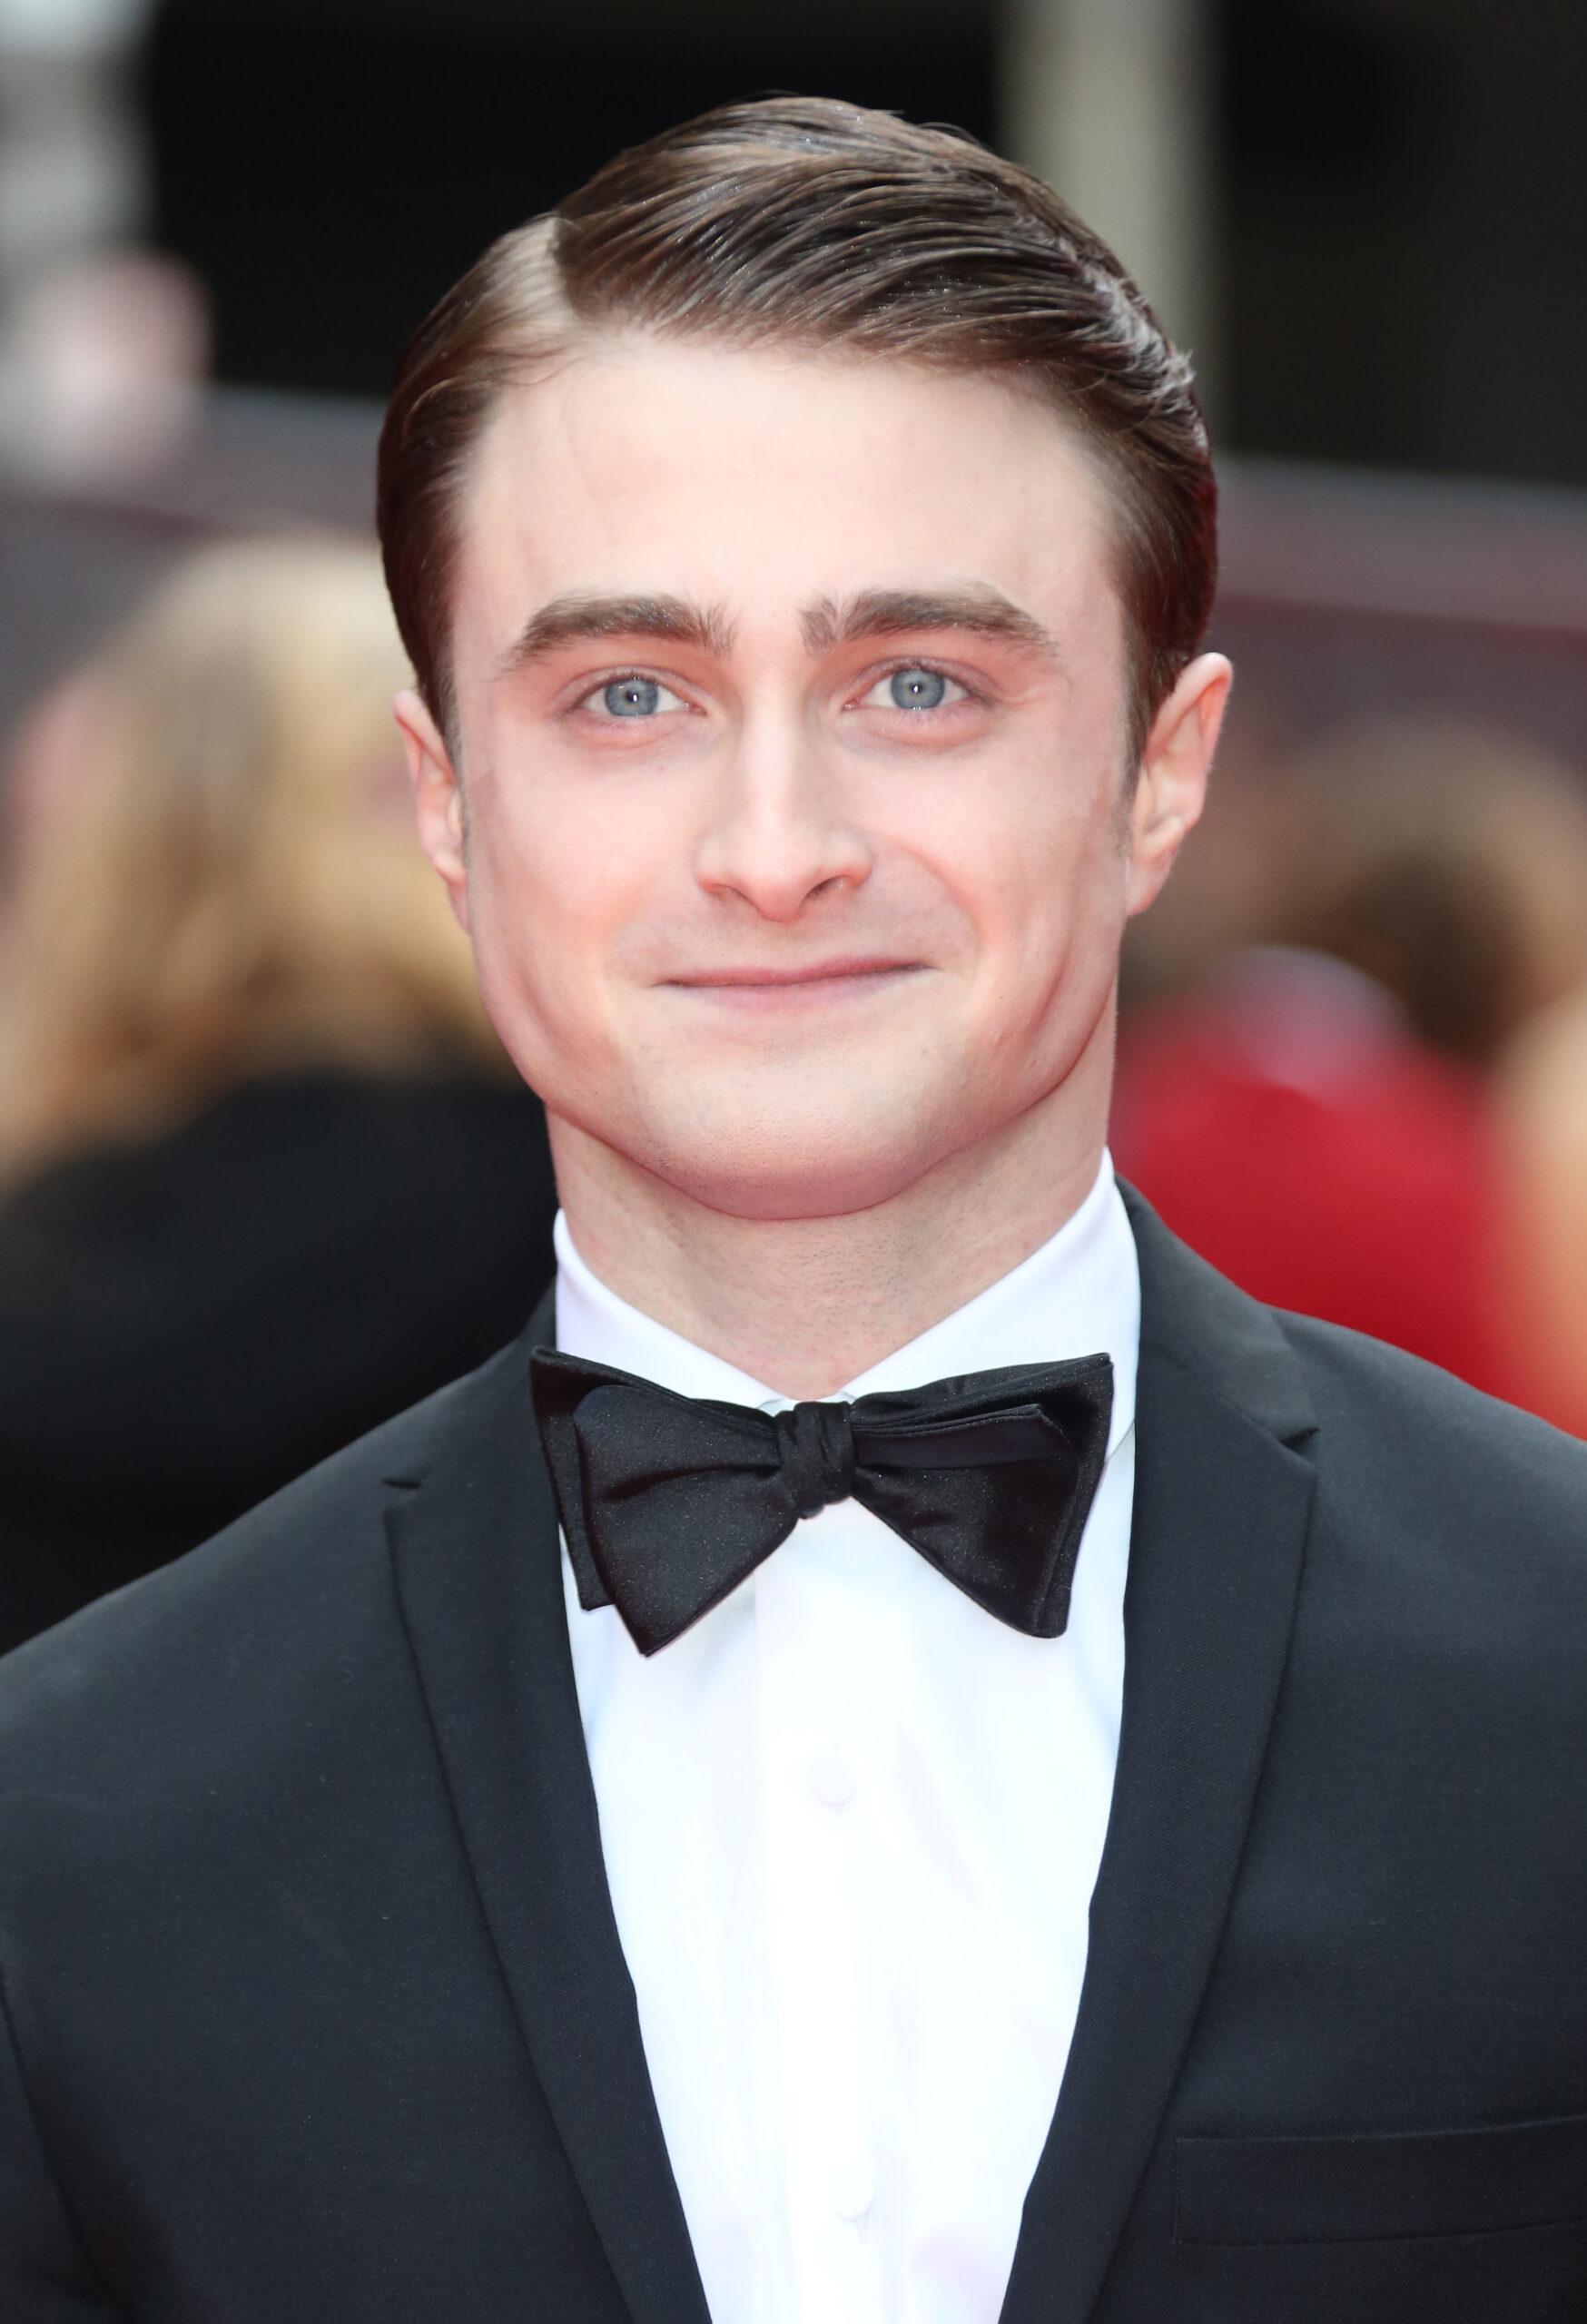 Daniel Radcliffe at The Laurence Olivier Awards 2013